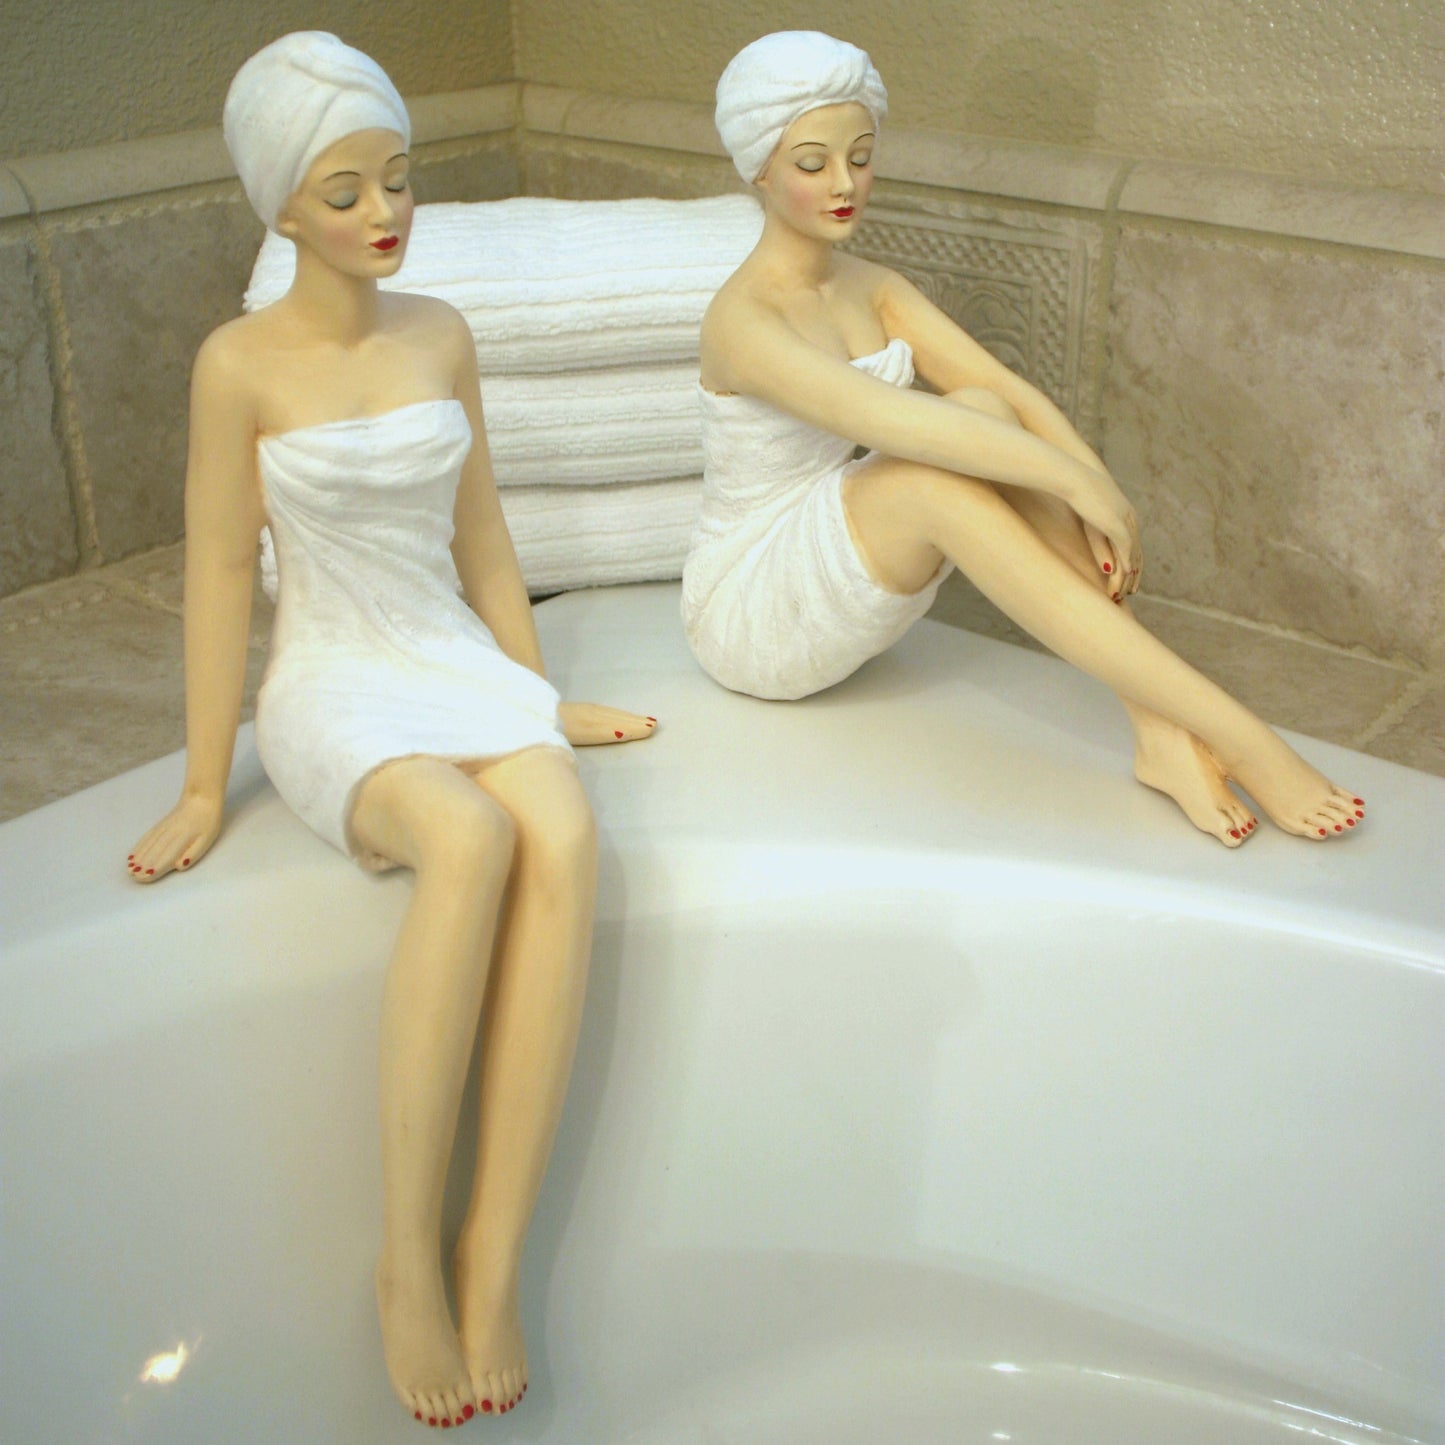 Spa Girl Beauties - Resin Collectible Statuary - Spa Girl with Knees Up shown with Spa Girl Shelf Sitter in Master Bathroom | INSIDE OUT | InsideOutCatalog.com